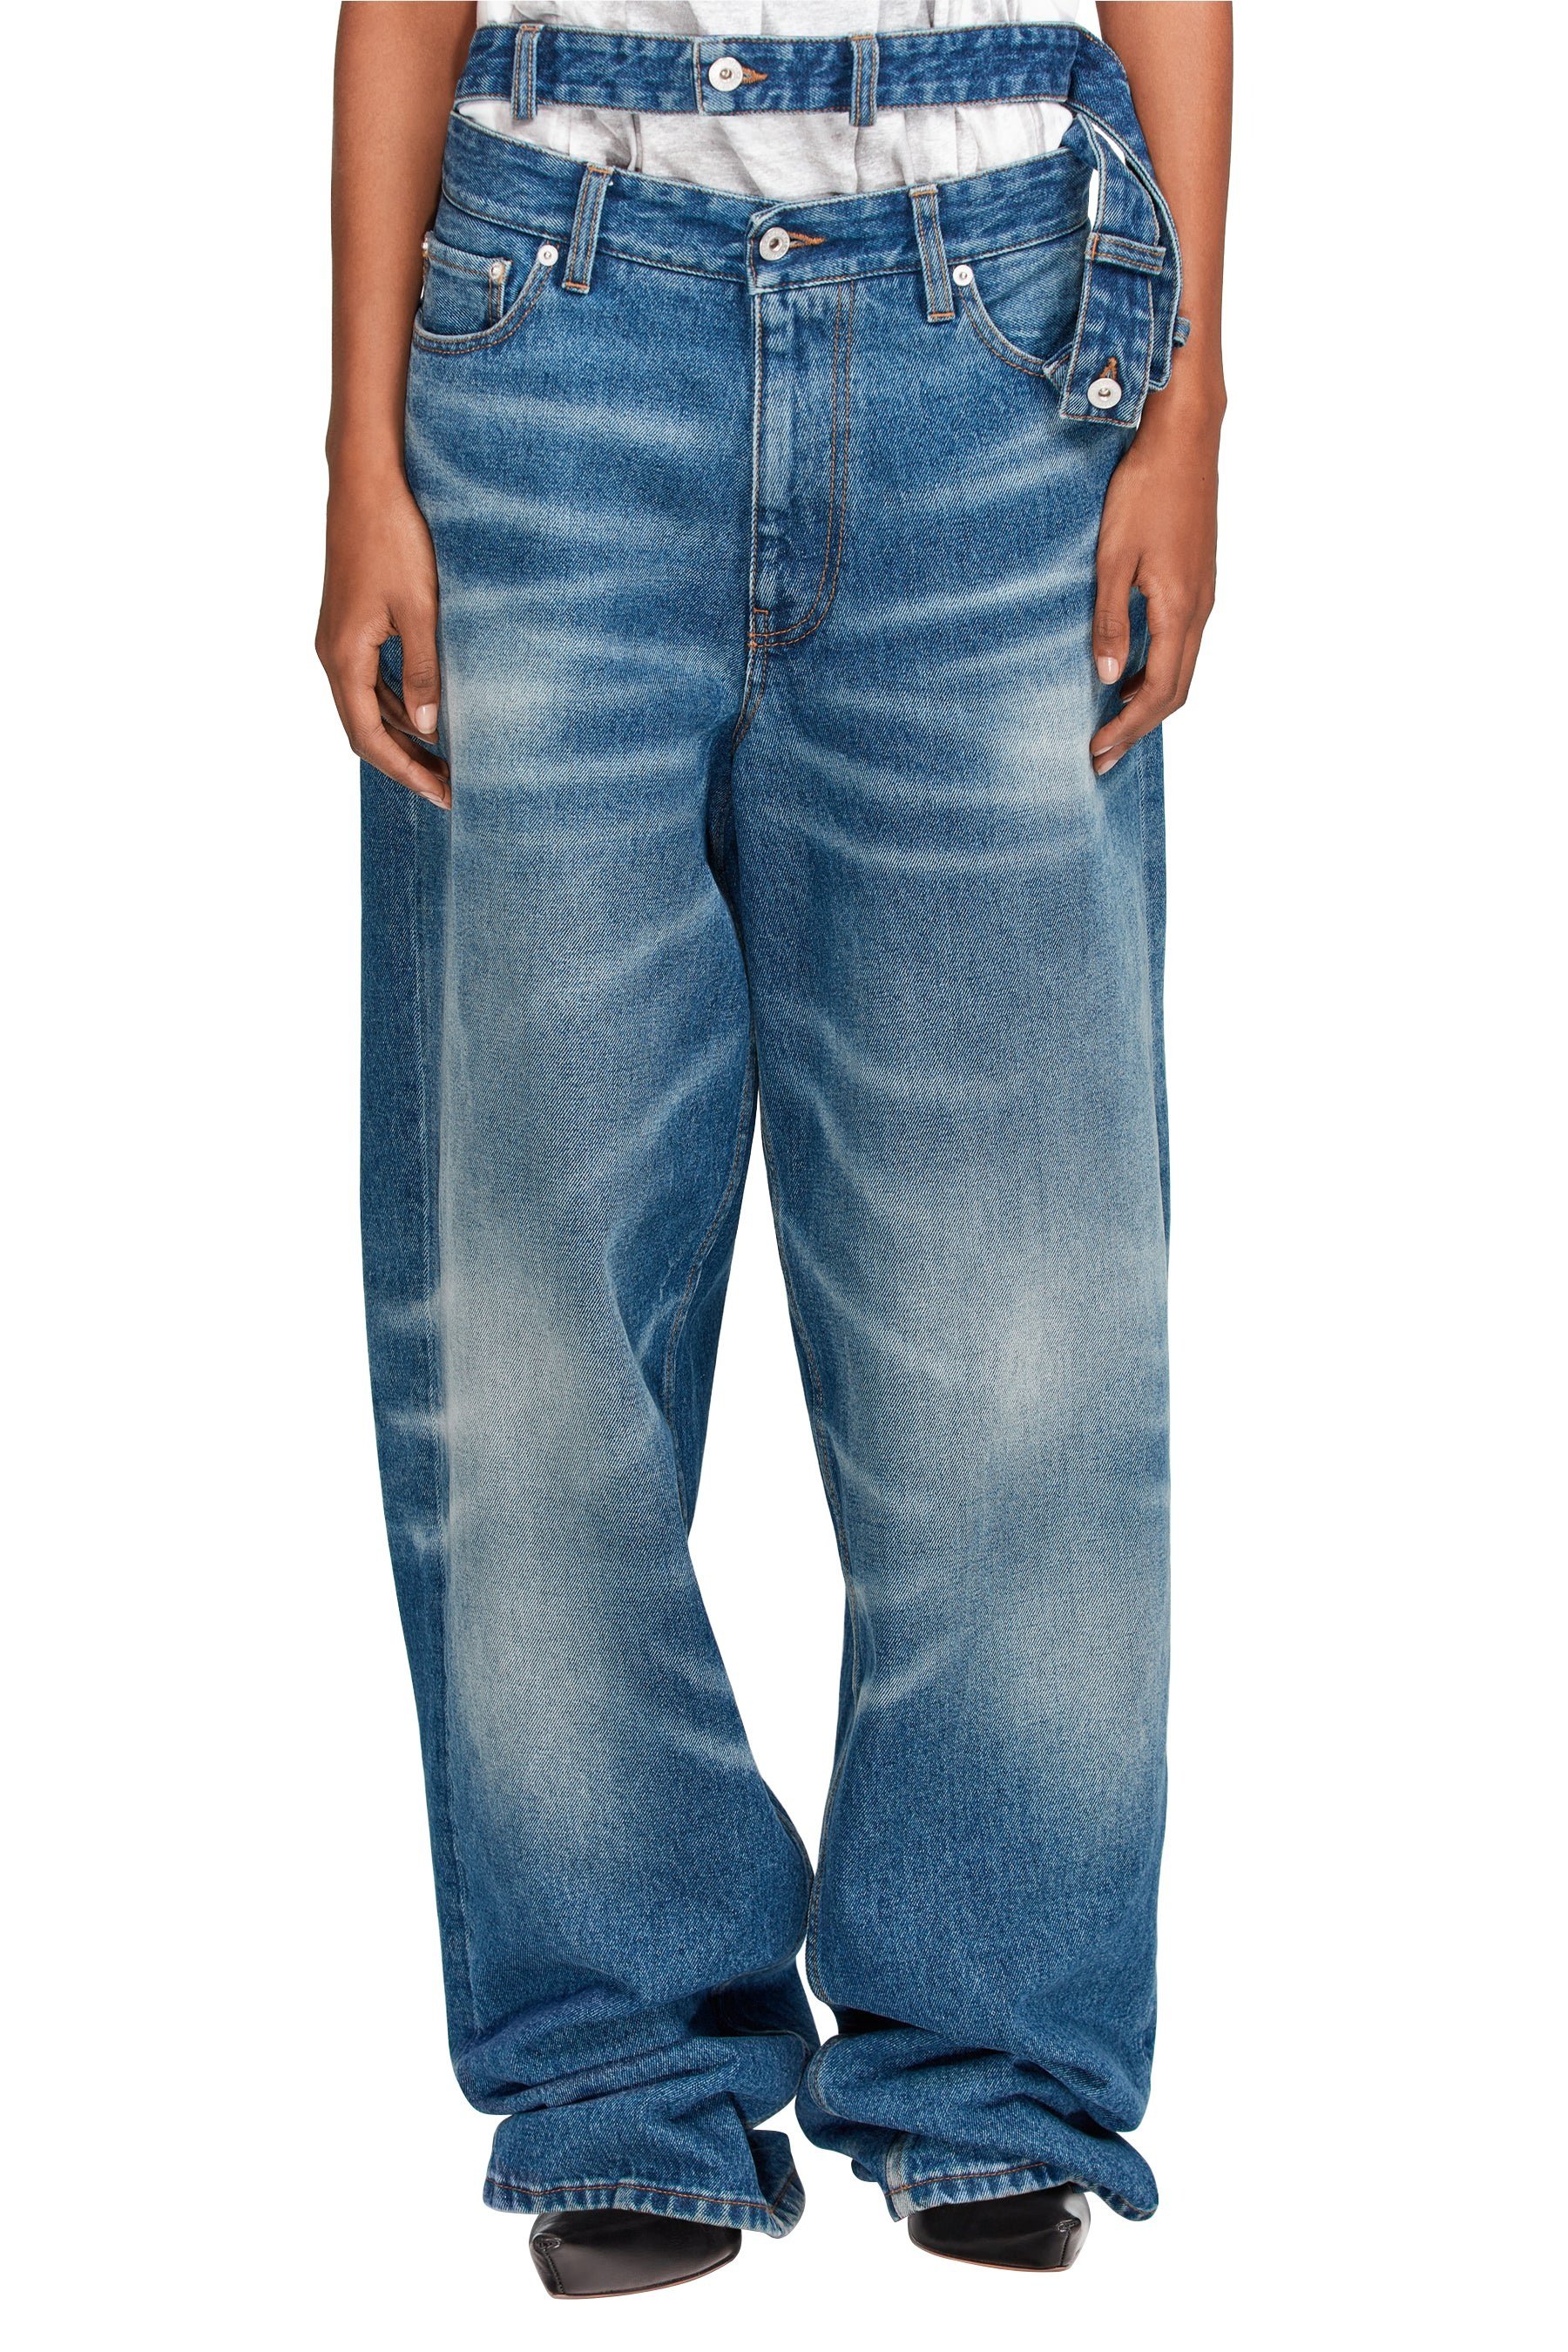 Y/Project Multi Waistband Jeans — SLOW WAVES